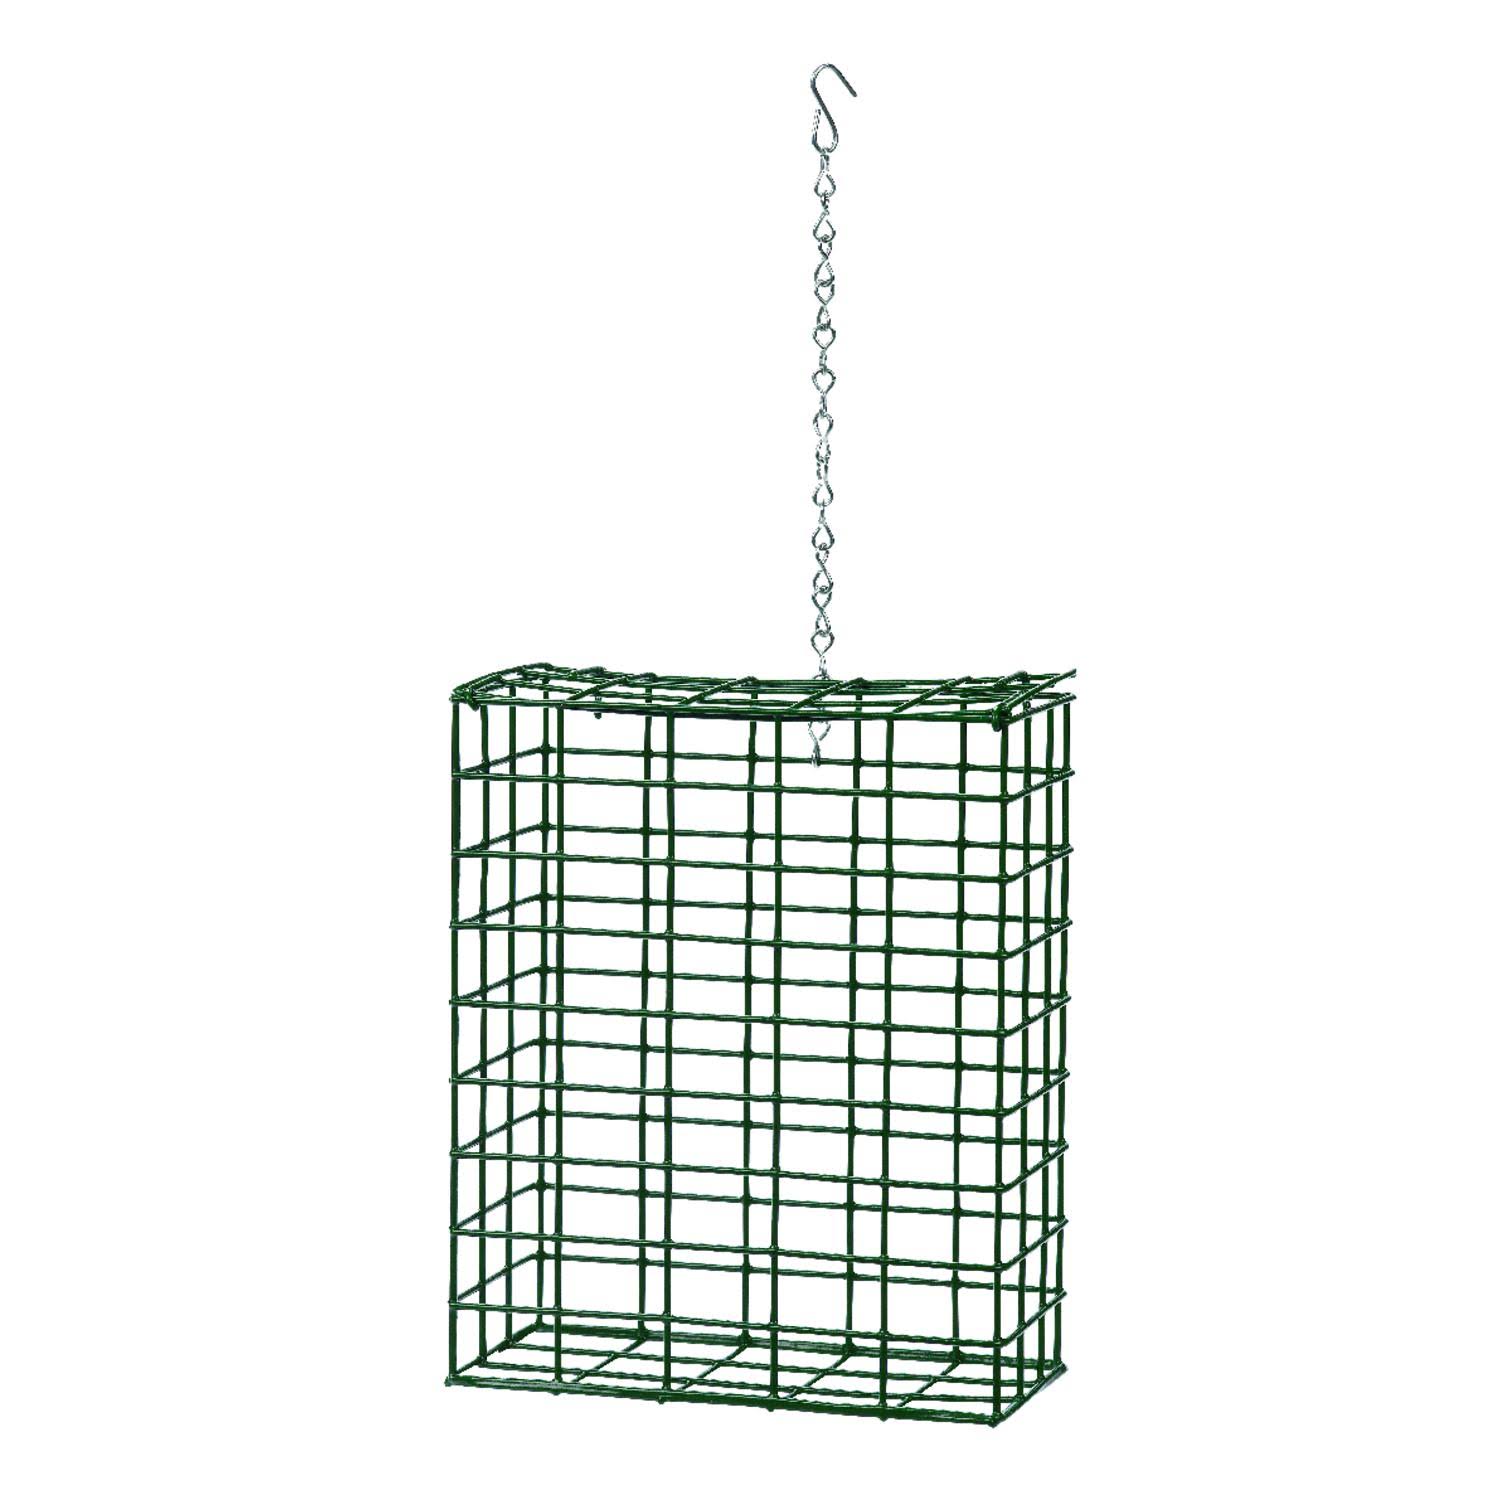 Heath Outdoor Products S-4 Suet and Seed Cake Feeder - Large